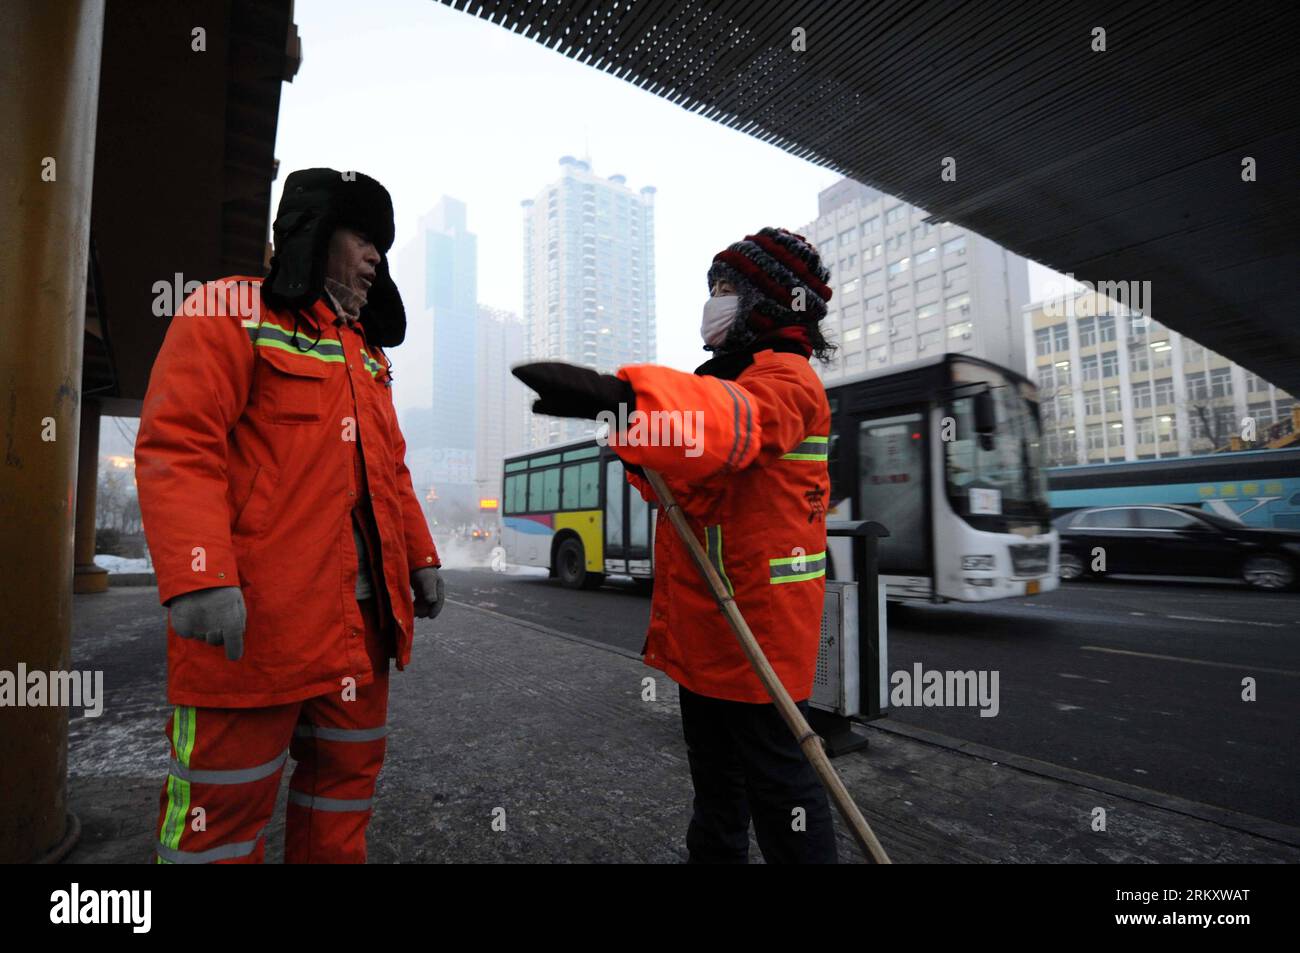 Bildnummer: 59095363  Datum: 16.01.2013  Copyright: imago/Xinhua HARBIN, Jan. 16, 2013 (Xinhua) -- Sanitation worker Yang Weixia talks with her colleague on a road in Harbin, capital of northeast China s Heilongjiang Province, Jan. 16, 2013. Yang Weixia, 48, is an ordinary sanitation worker living in Harbin, a city known for its bitterly cold winters and often called the Ice City. For 32 years, Yang has never stopped sweating away at her work, though she often gets up at three o clock every morning and will not go back home until 9 in the evening in the cold winter. There are more than 10,000 Stock Photo